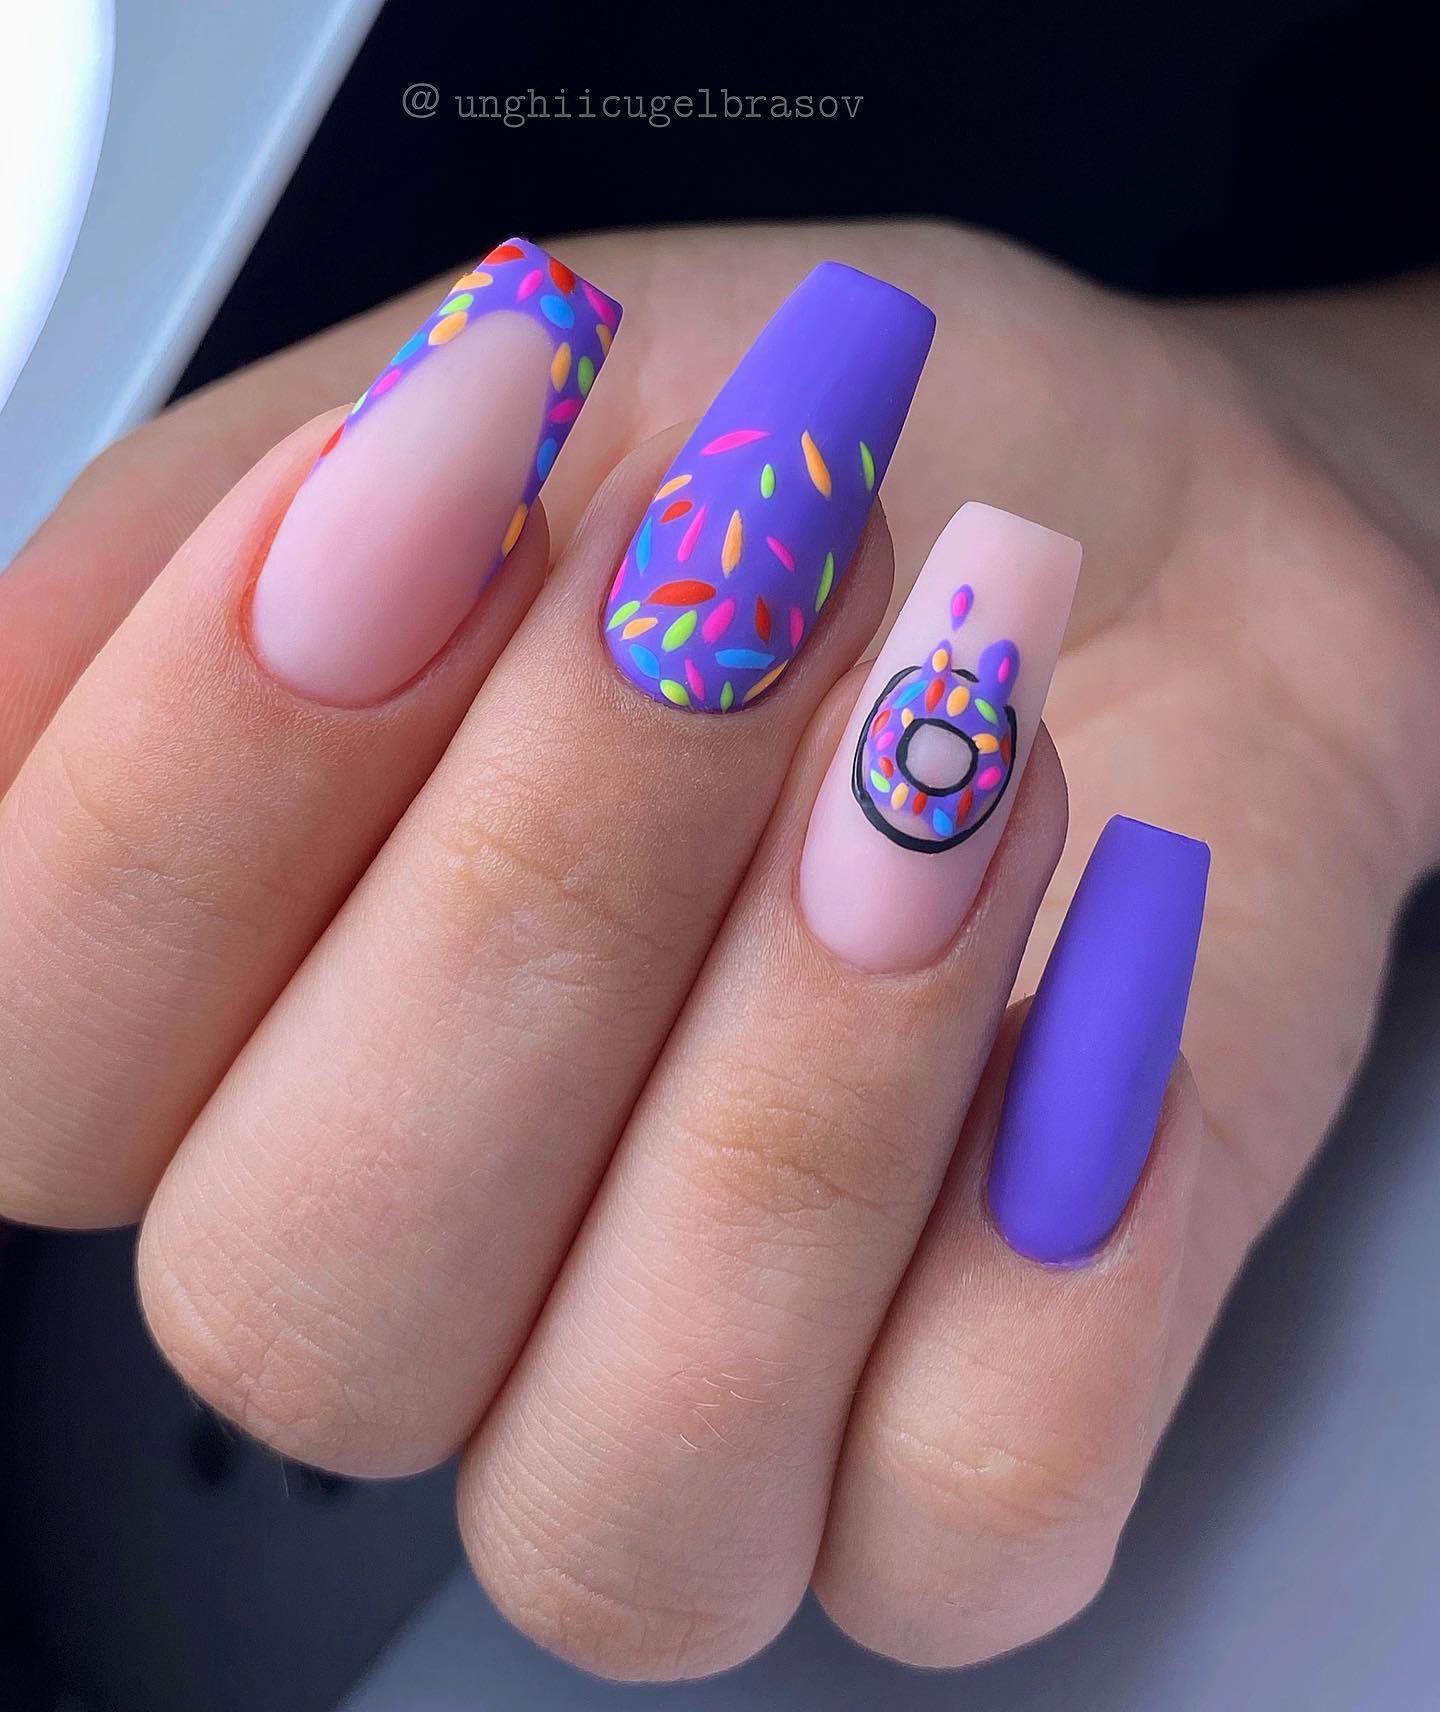 All shades of purple are amazing but the neon one is the greatest. In this nail design, accent nails are decorated with a purple French manicure and a donut, which is everyone's favorite. Also, these tiny colorful details help this nail design rock.